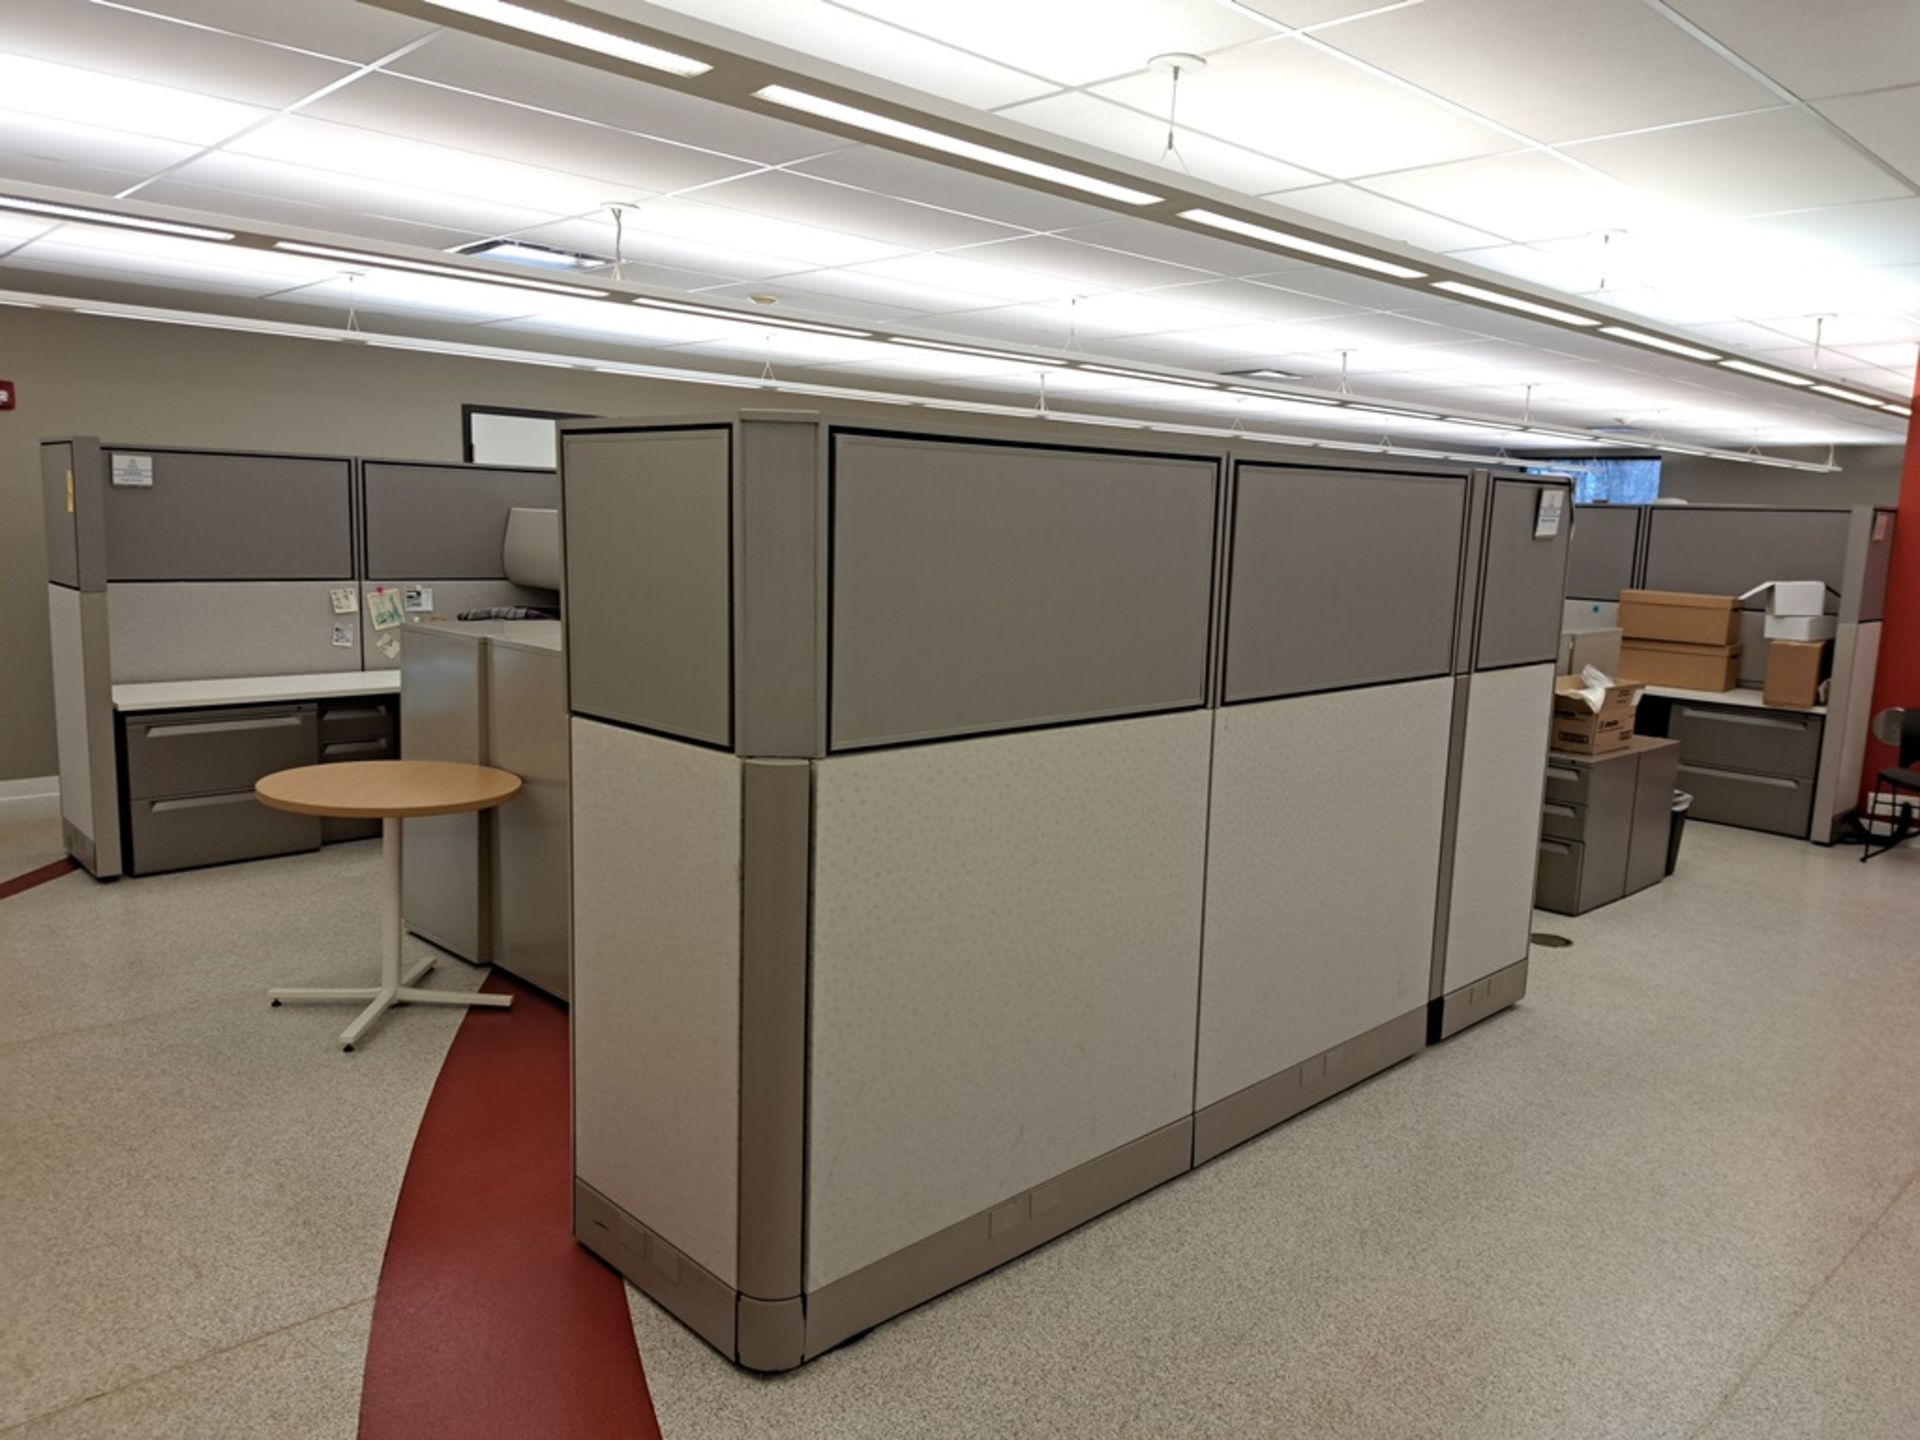 Herman Miller Cubicle Work Stations, 17' W X 50' L, (2) Work Stations per section, (12) Sections, - Image 2 of 25